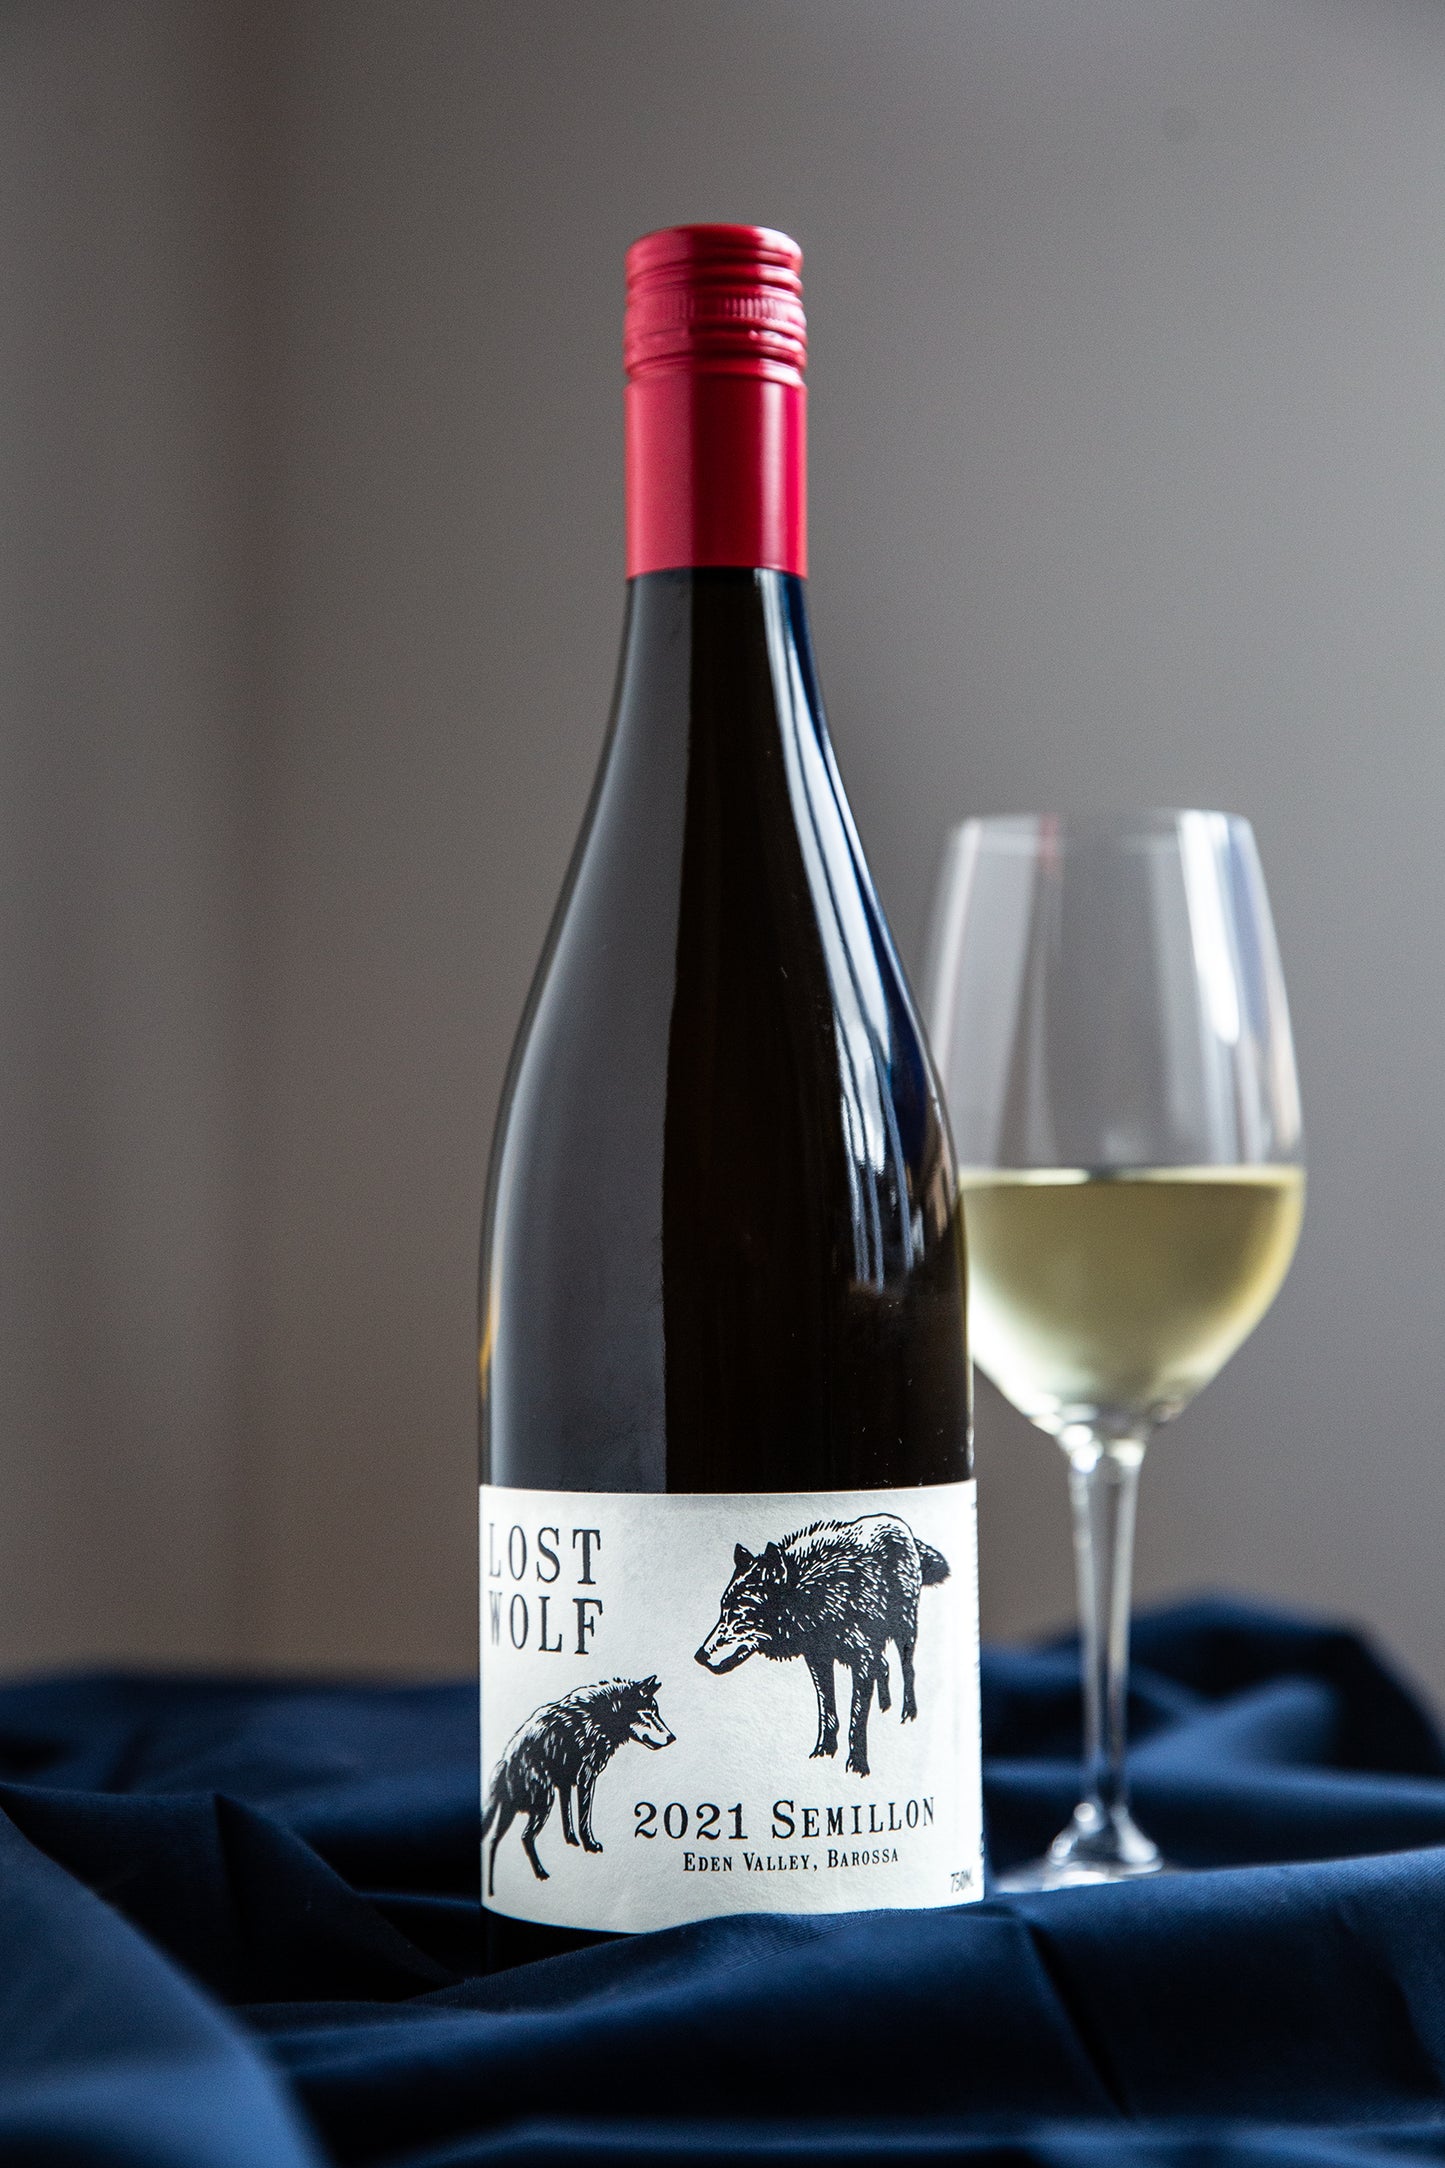 Lost Wolf 'Wood Aged' Semillon '21